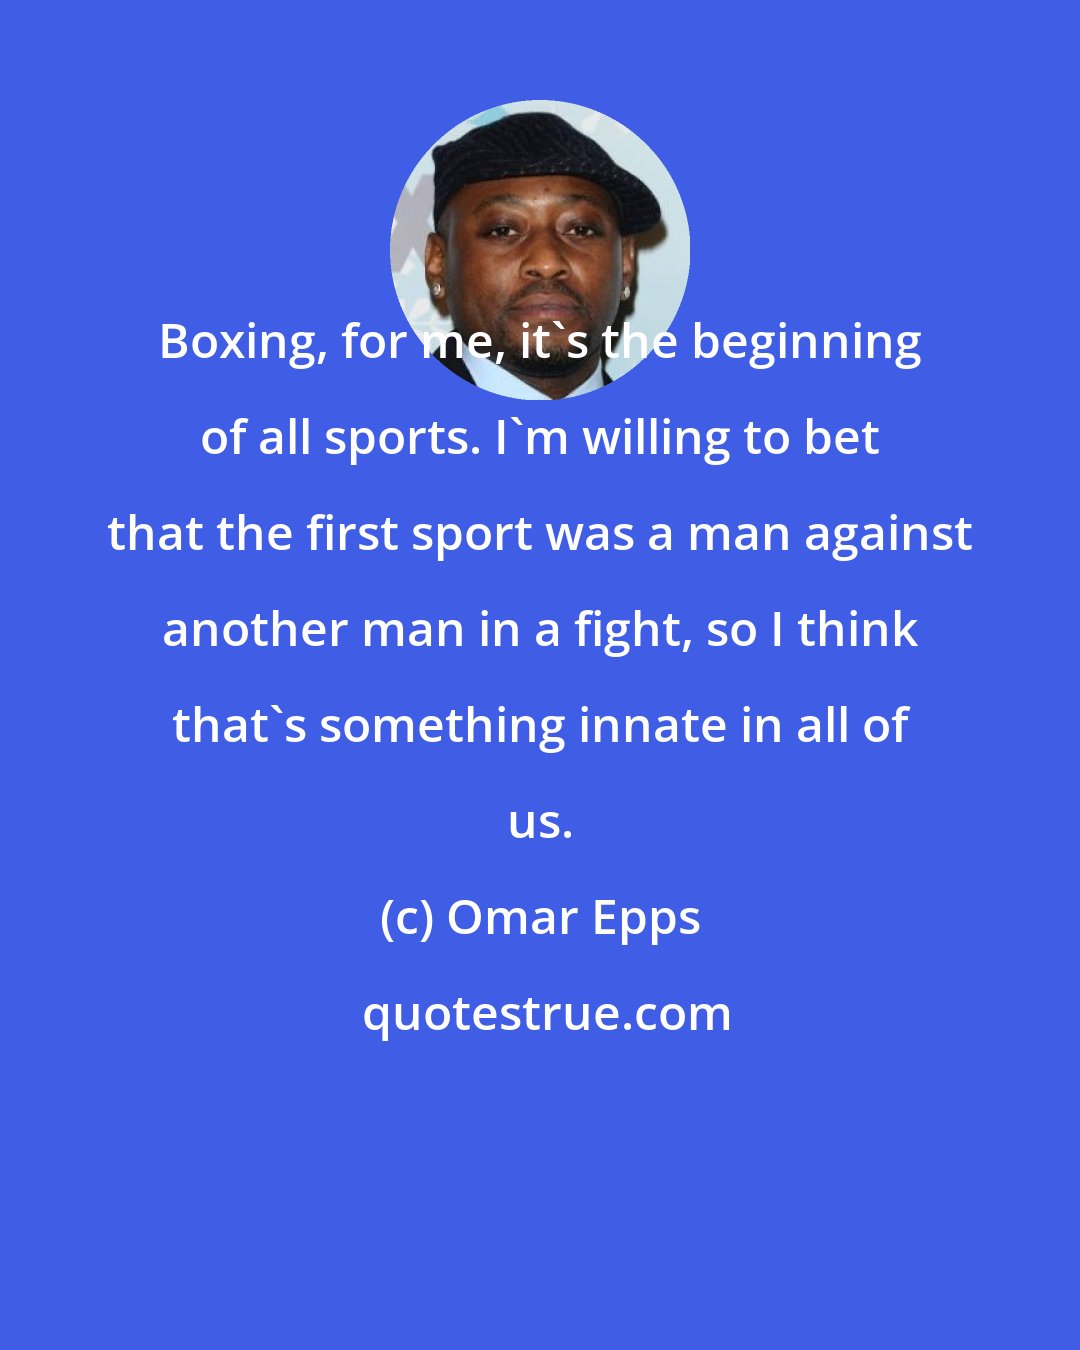 Omar Epps: Boxing, for me, it's the beginning of all sports. I'm willing to bet that the first sport was a man against another man in a fight, so I think that's something innate in all of us.